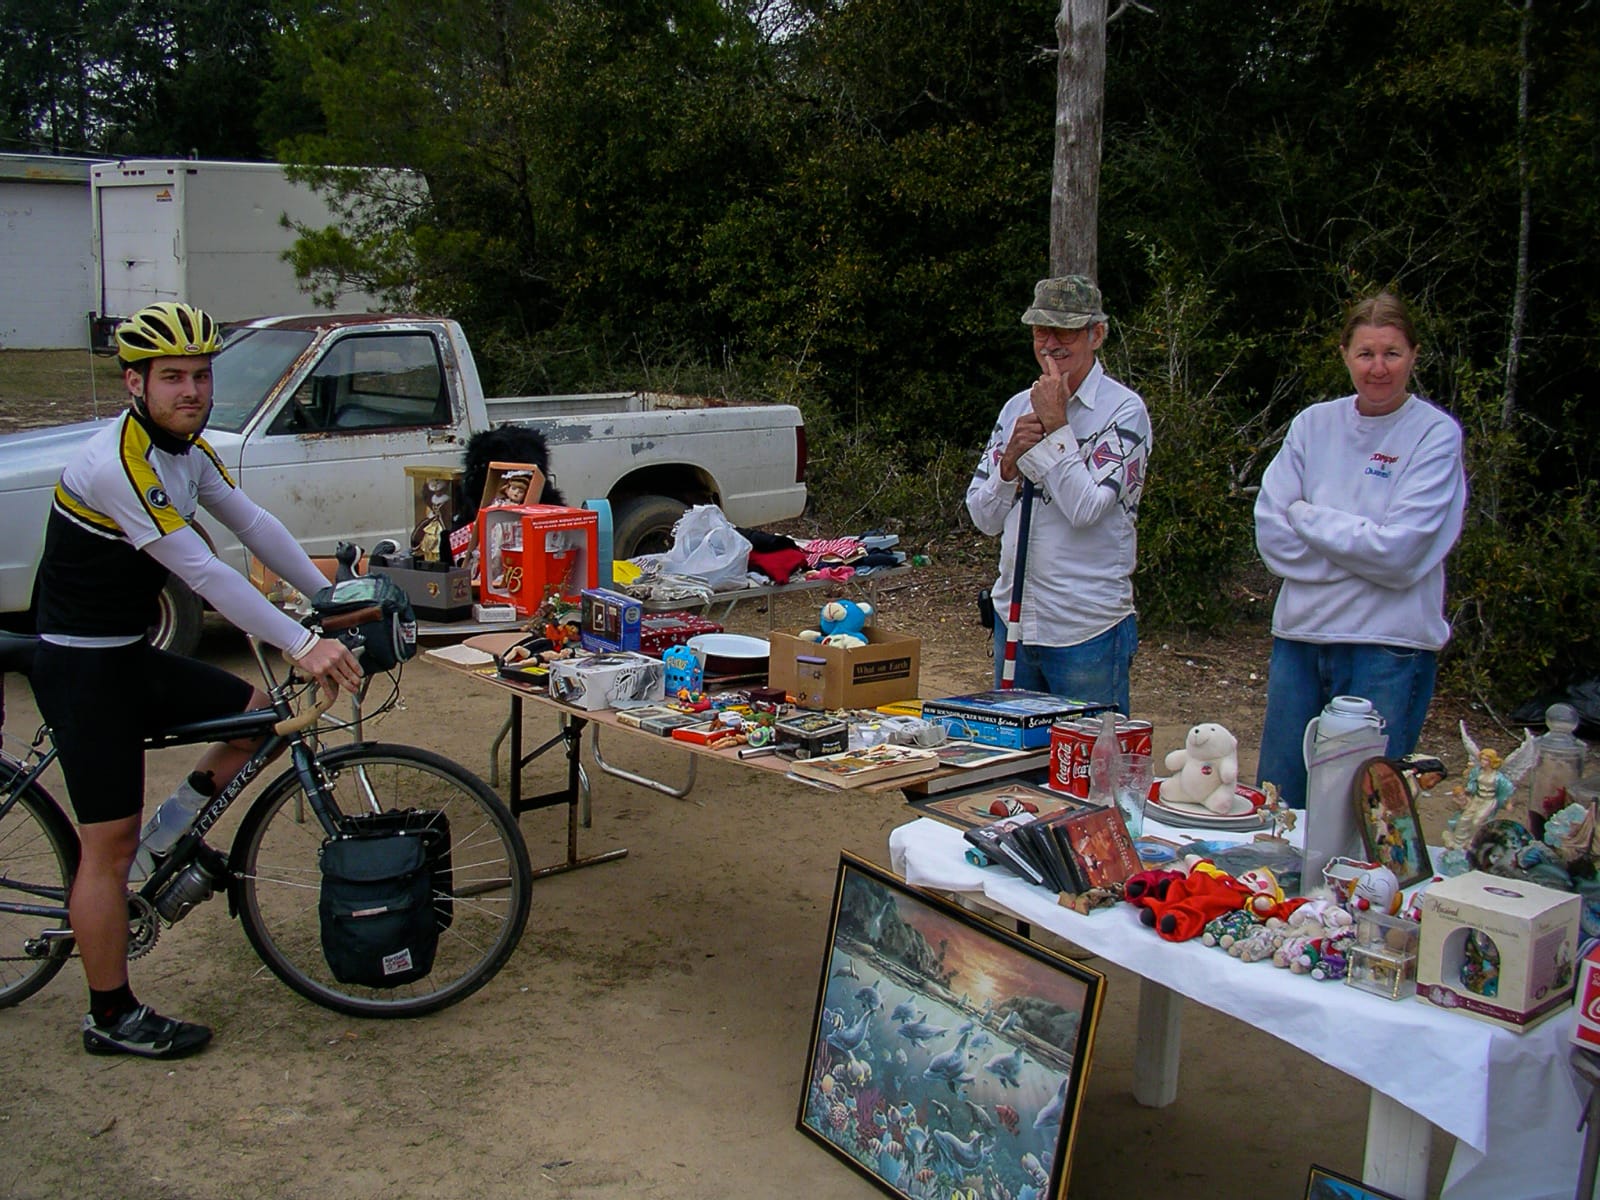 The roadside sale at which I was united with our mascot